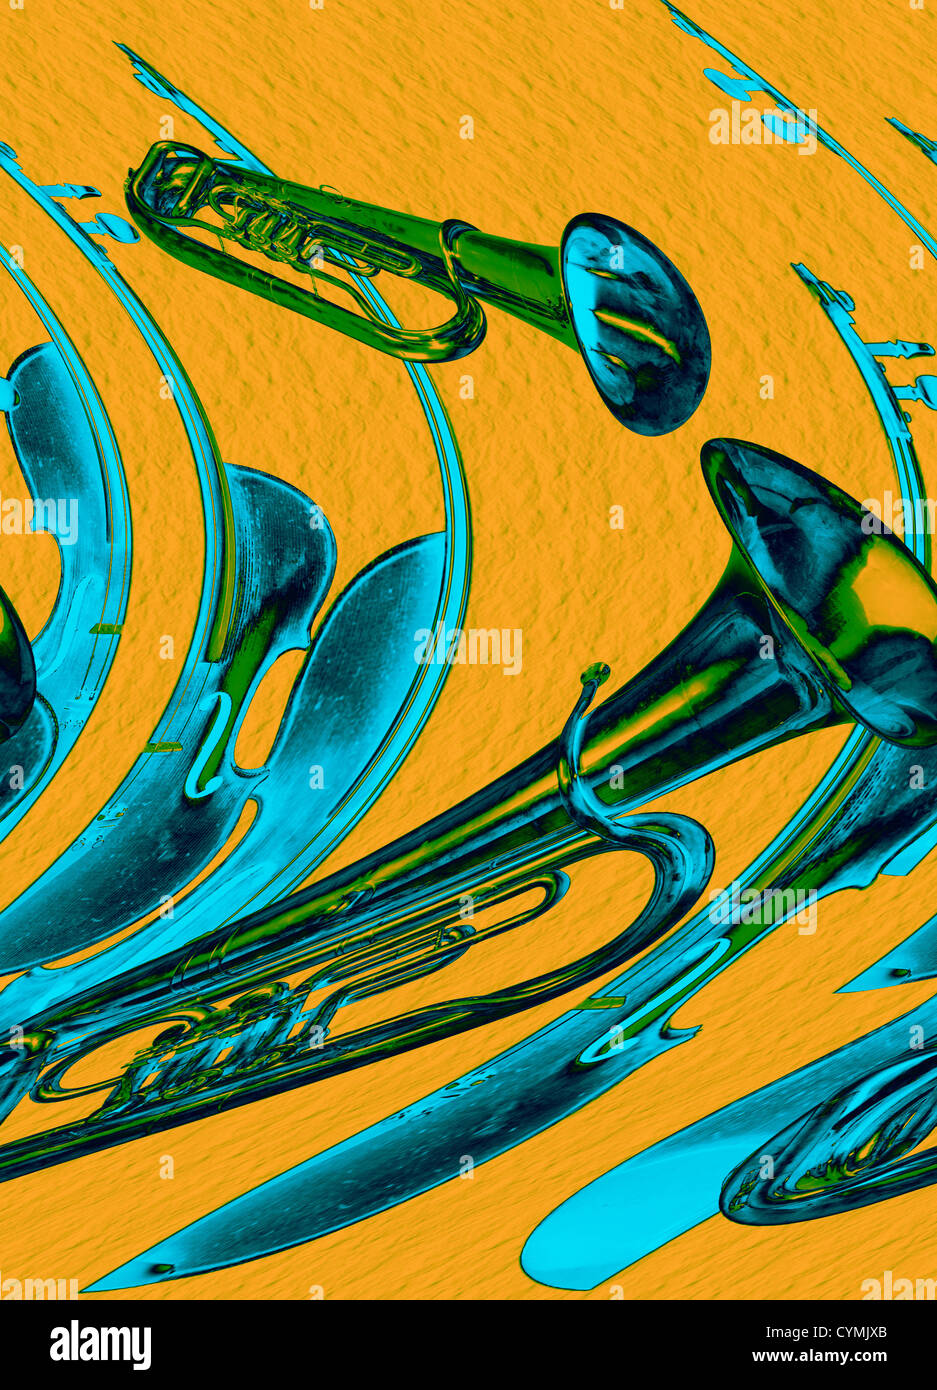 The abstract image of a violin and tuba on a yellow background Stock Photo